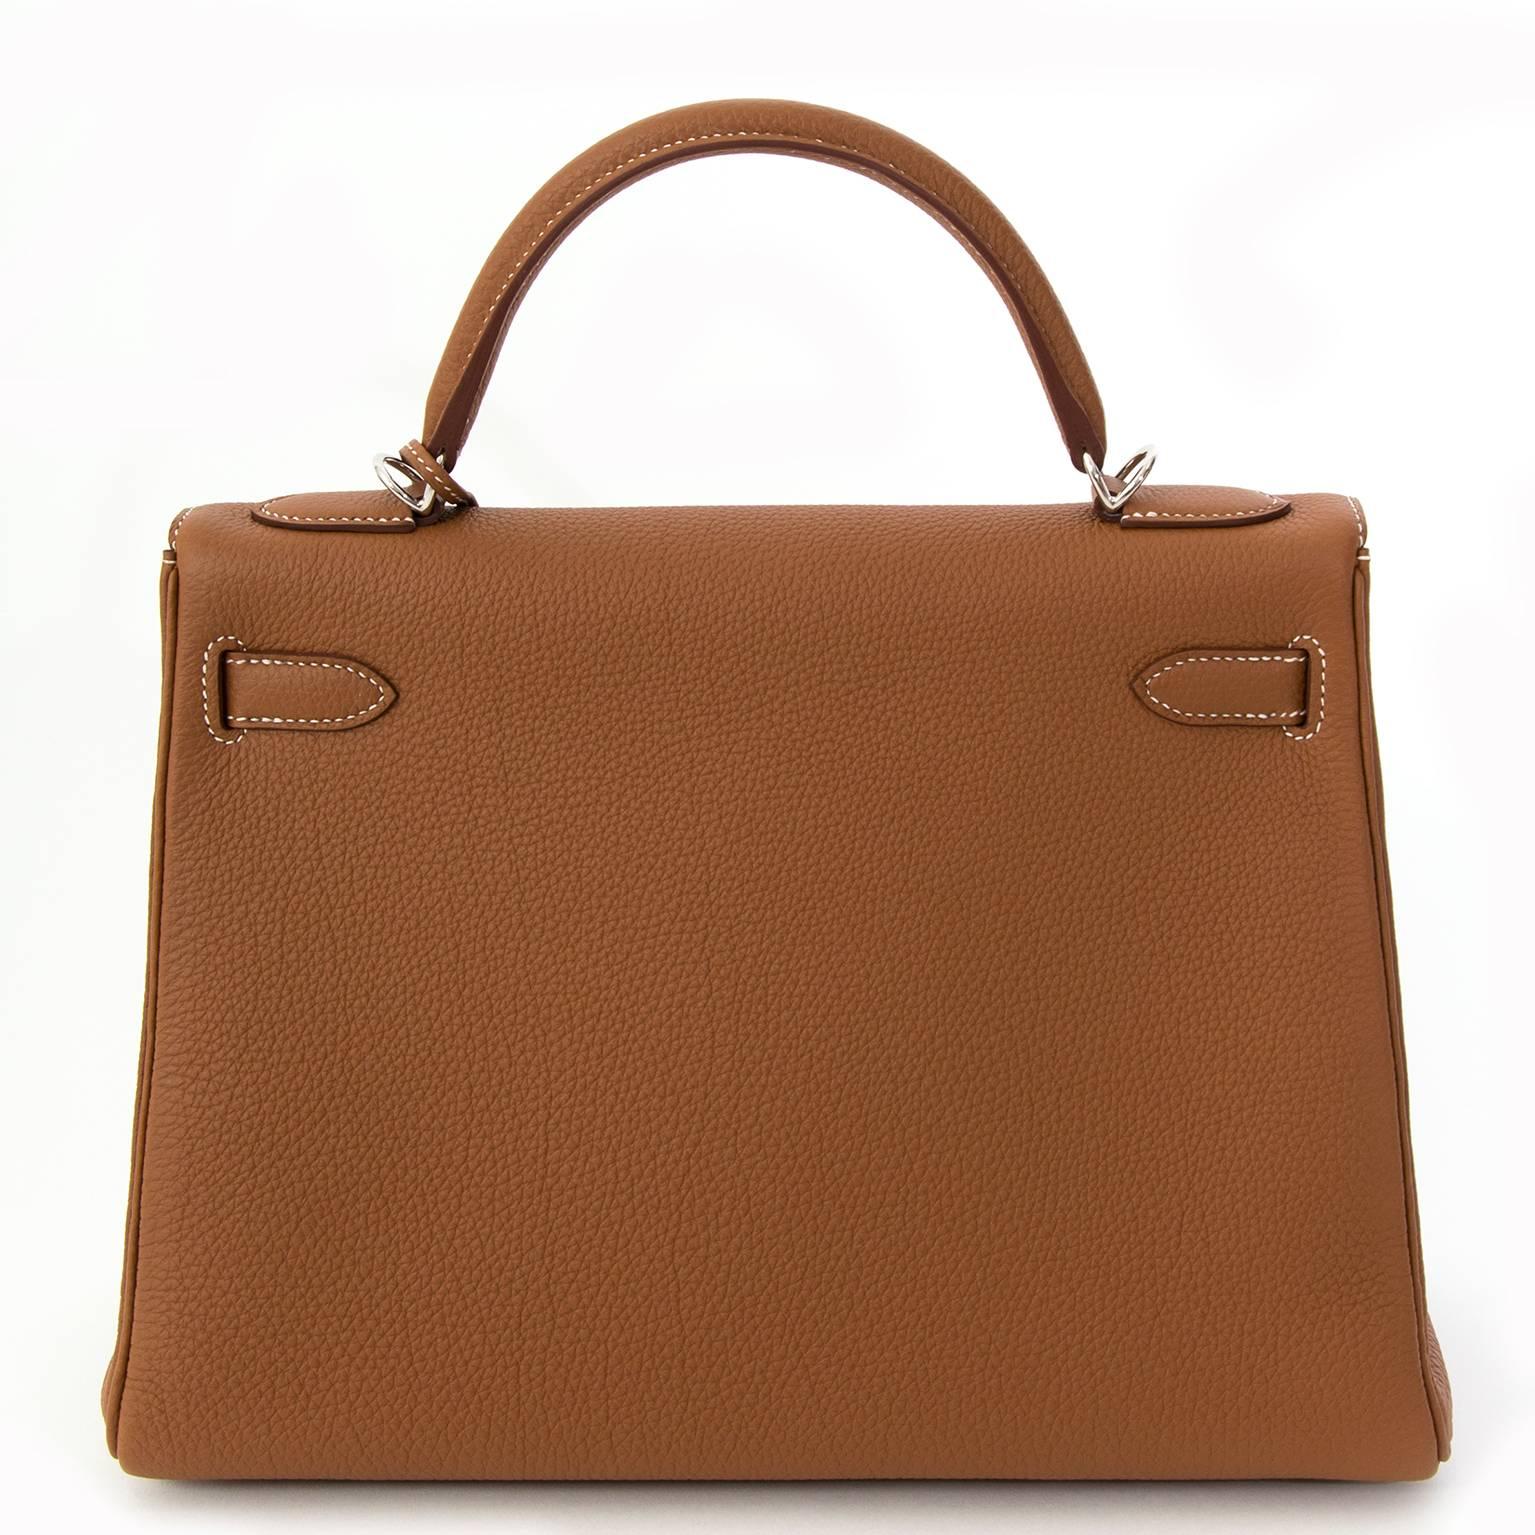 This Hermes Kelly in the iconic Gold color is a real statement piece.
This Kelly bag is made out of the Popular Togo leather. The Kelly bag is accented with palladium hardware and features a single top handle, turn-lock closure, and four protective